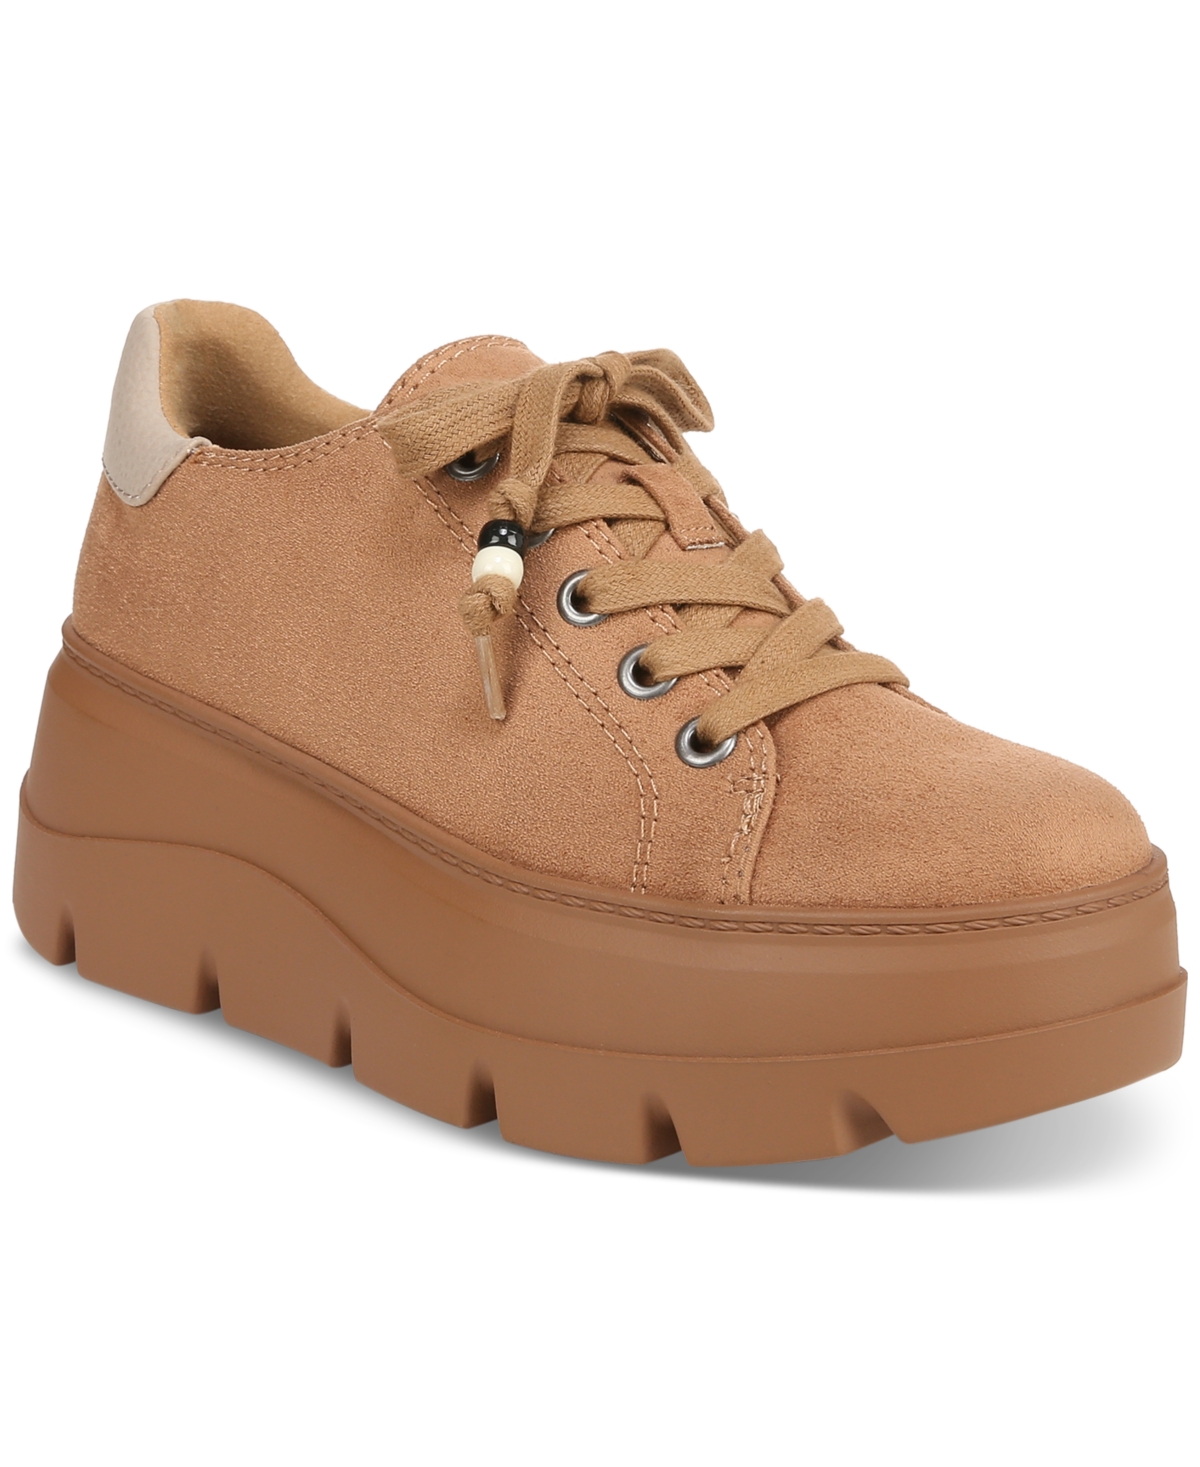 Women's Bea Platform Lace-Up Sneakers - Brown